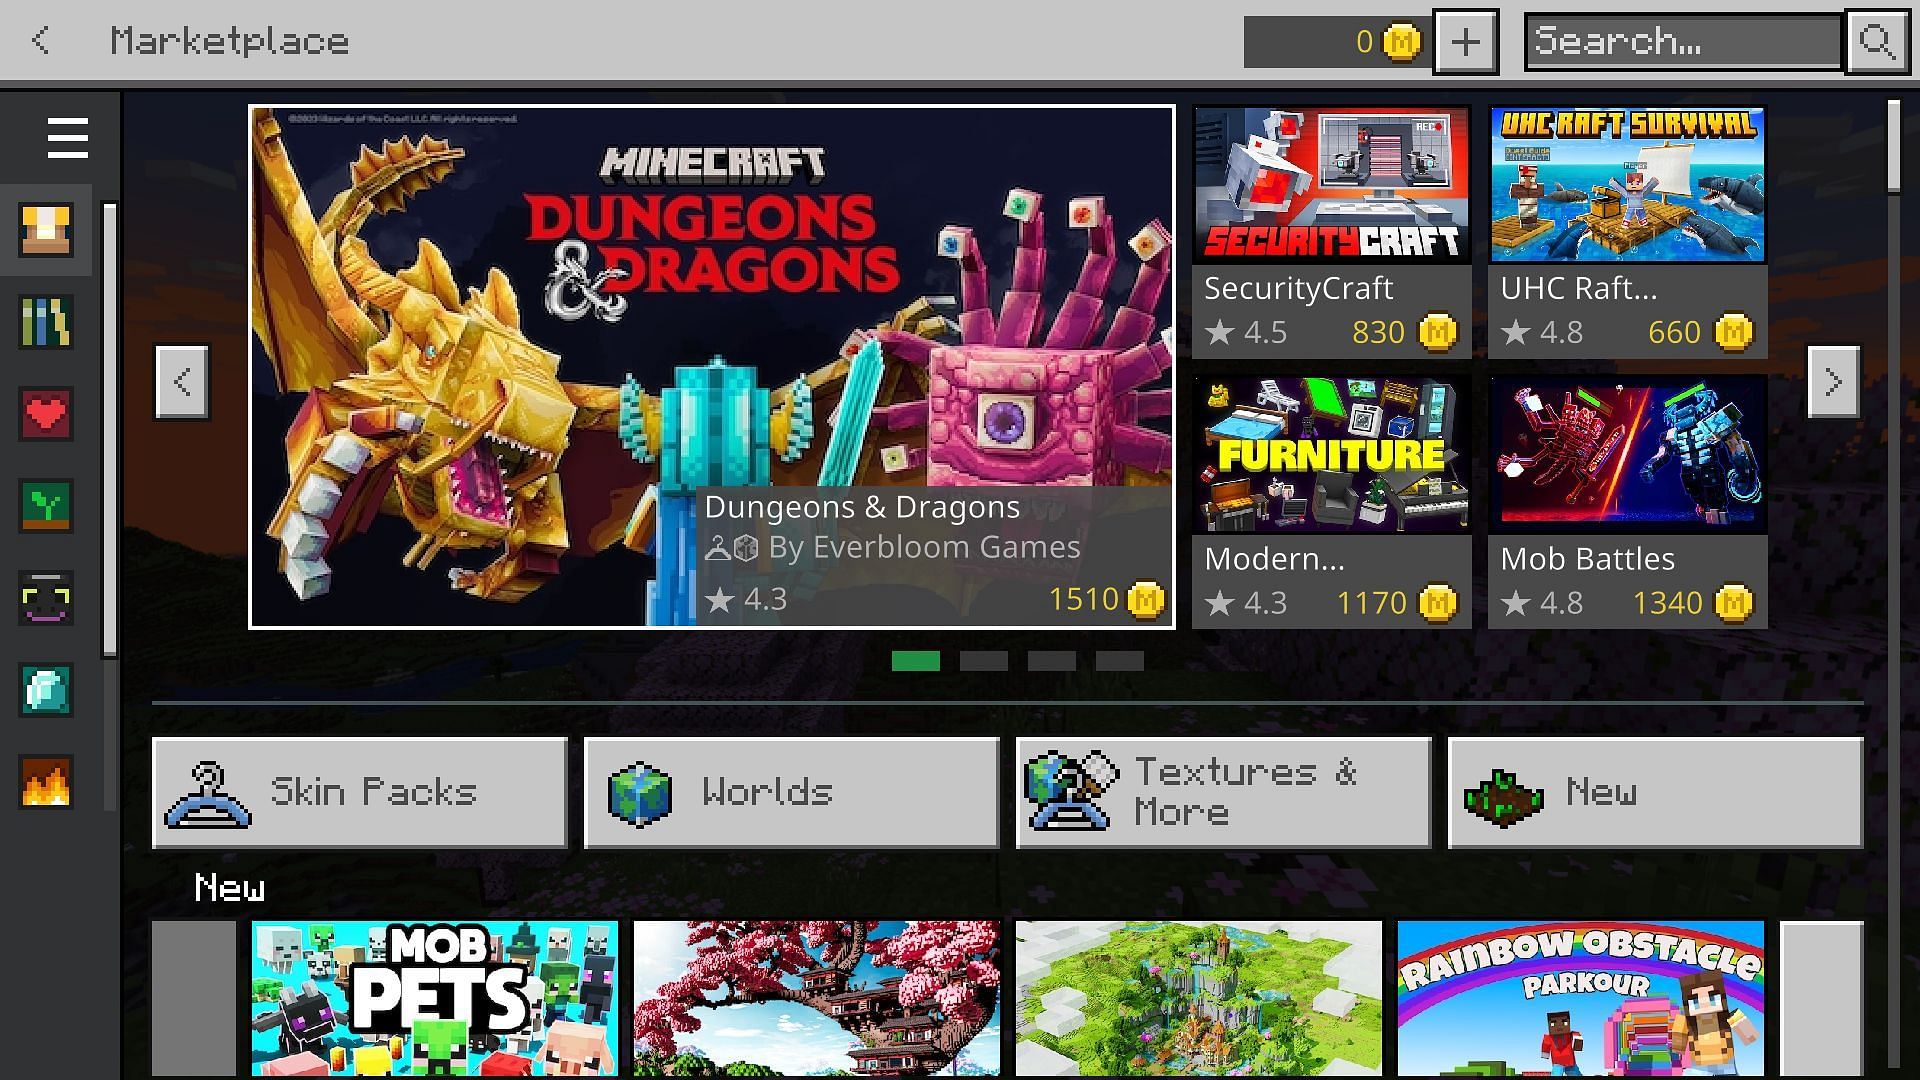 Minecraft Dungeons & Dragons DLC download guide